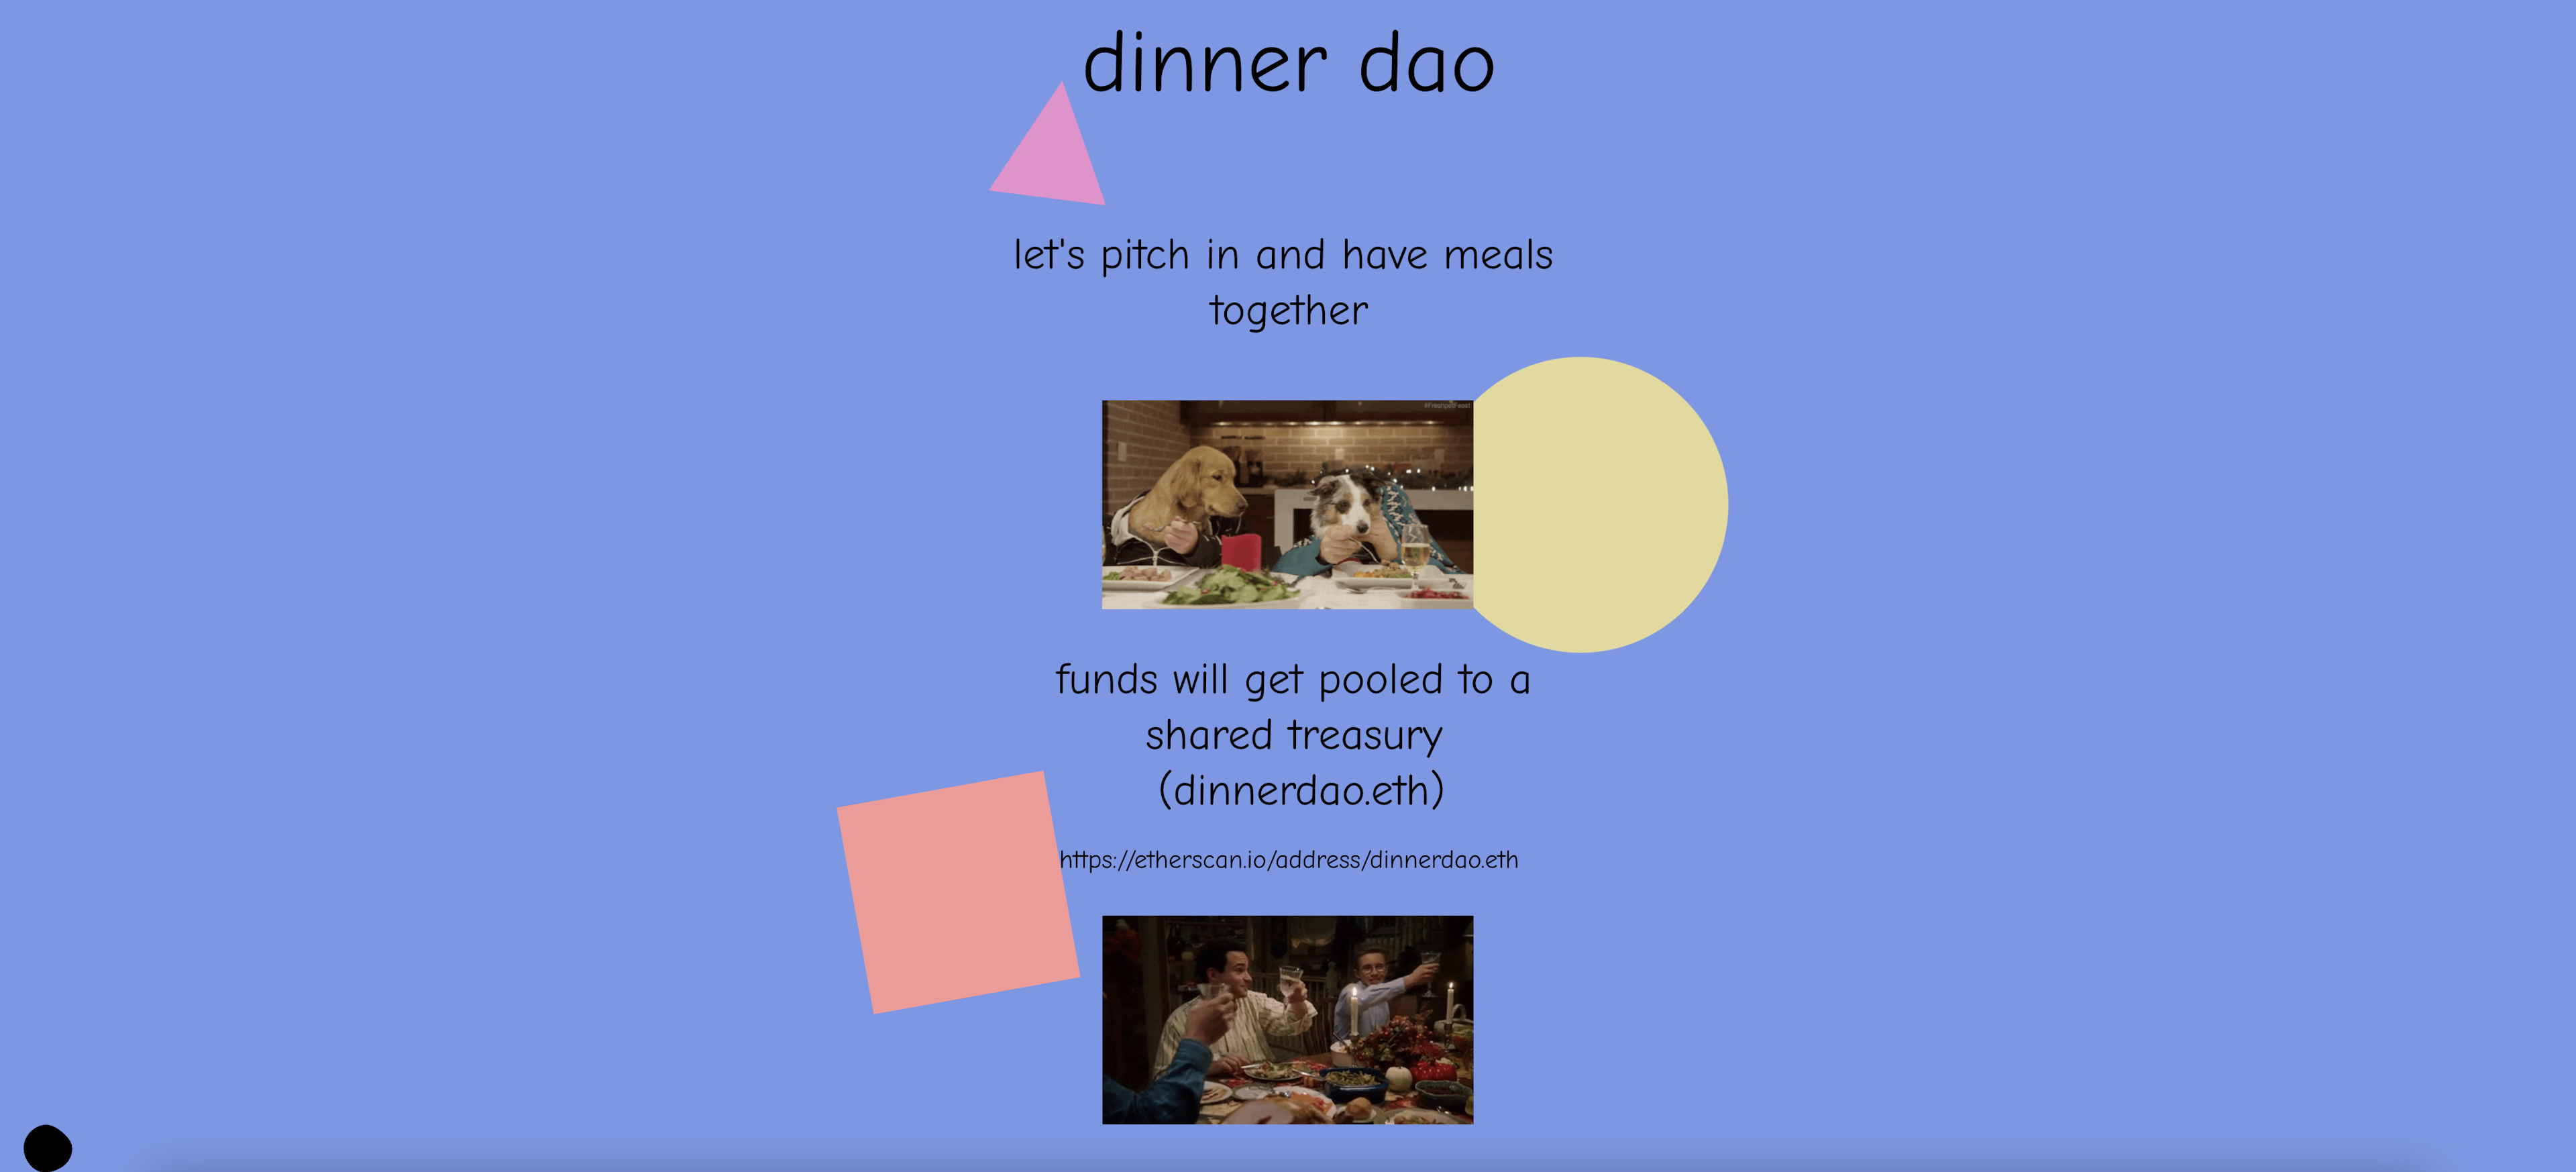 First Dinner DAO website, made in less than 30 minutes